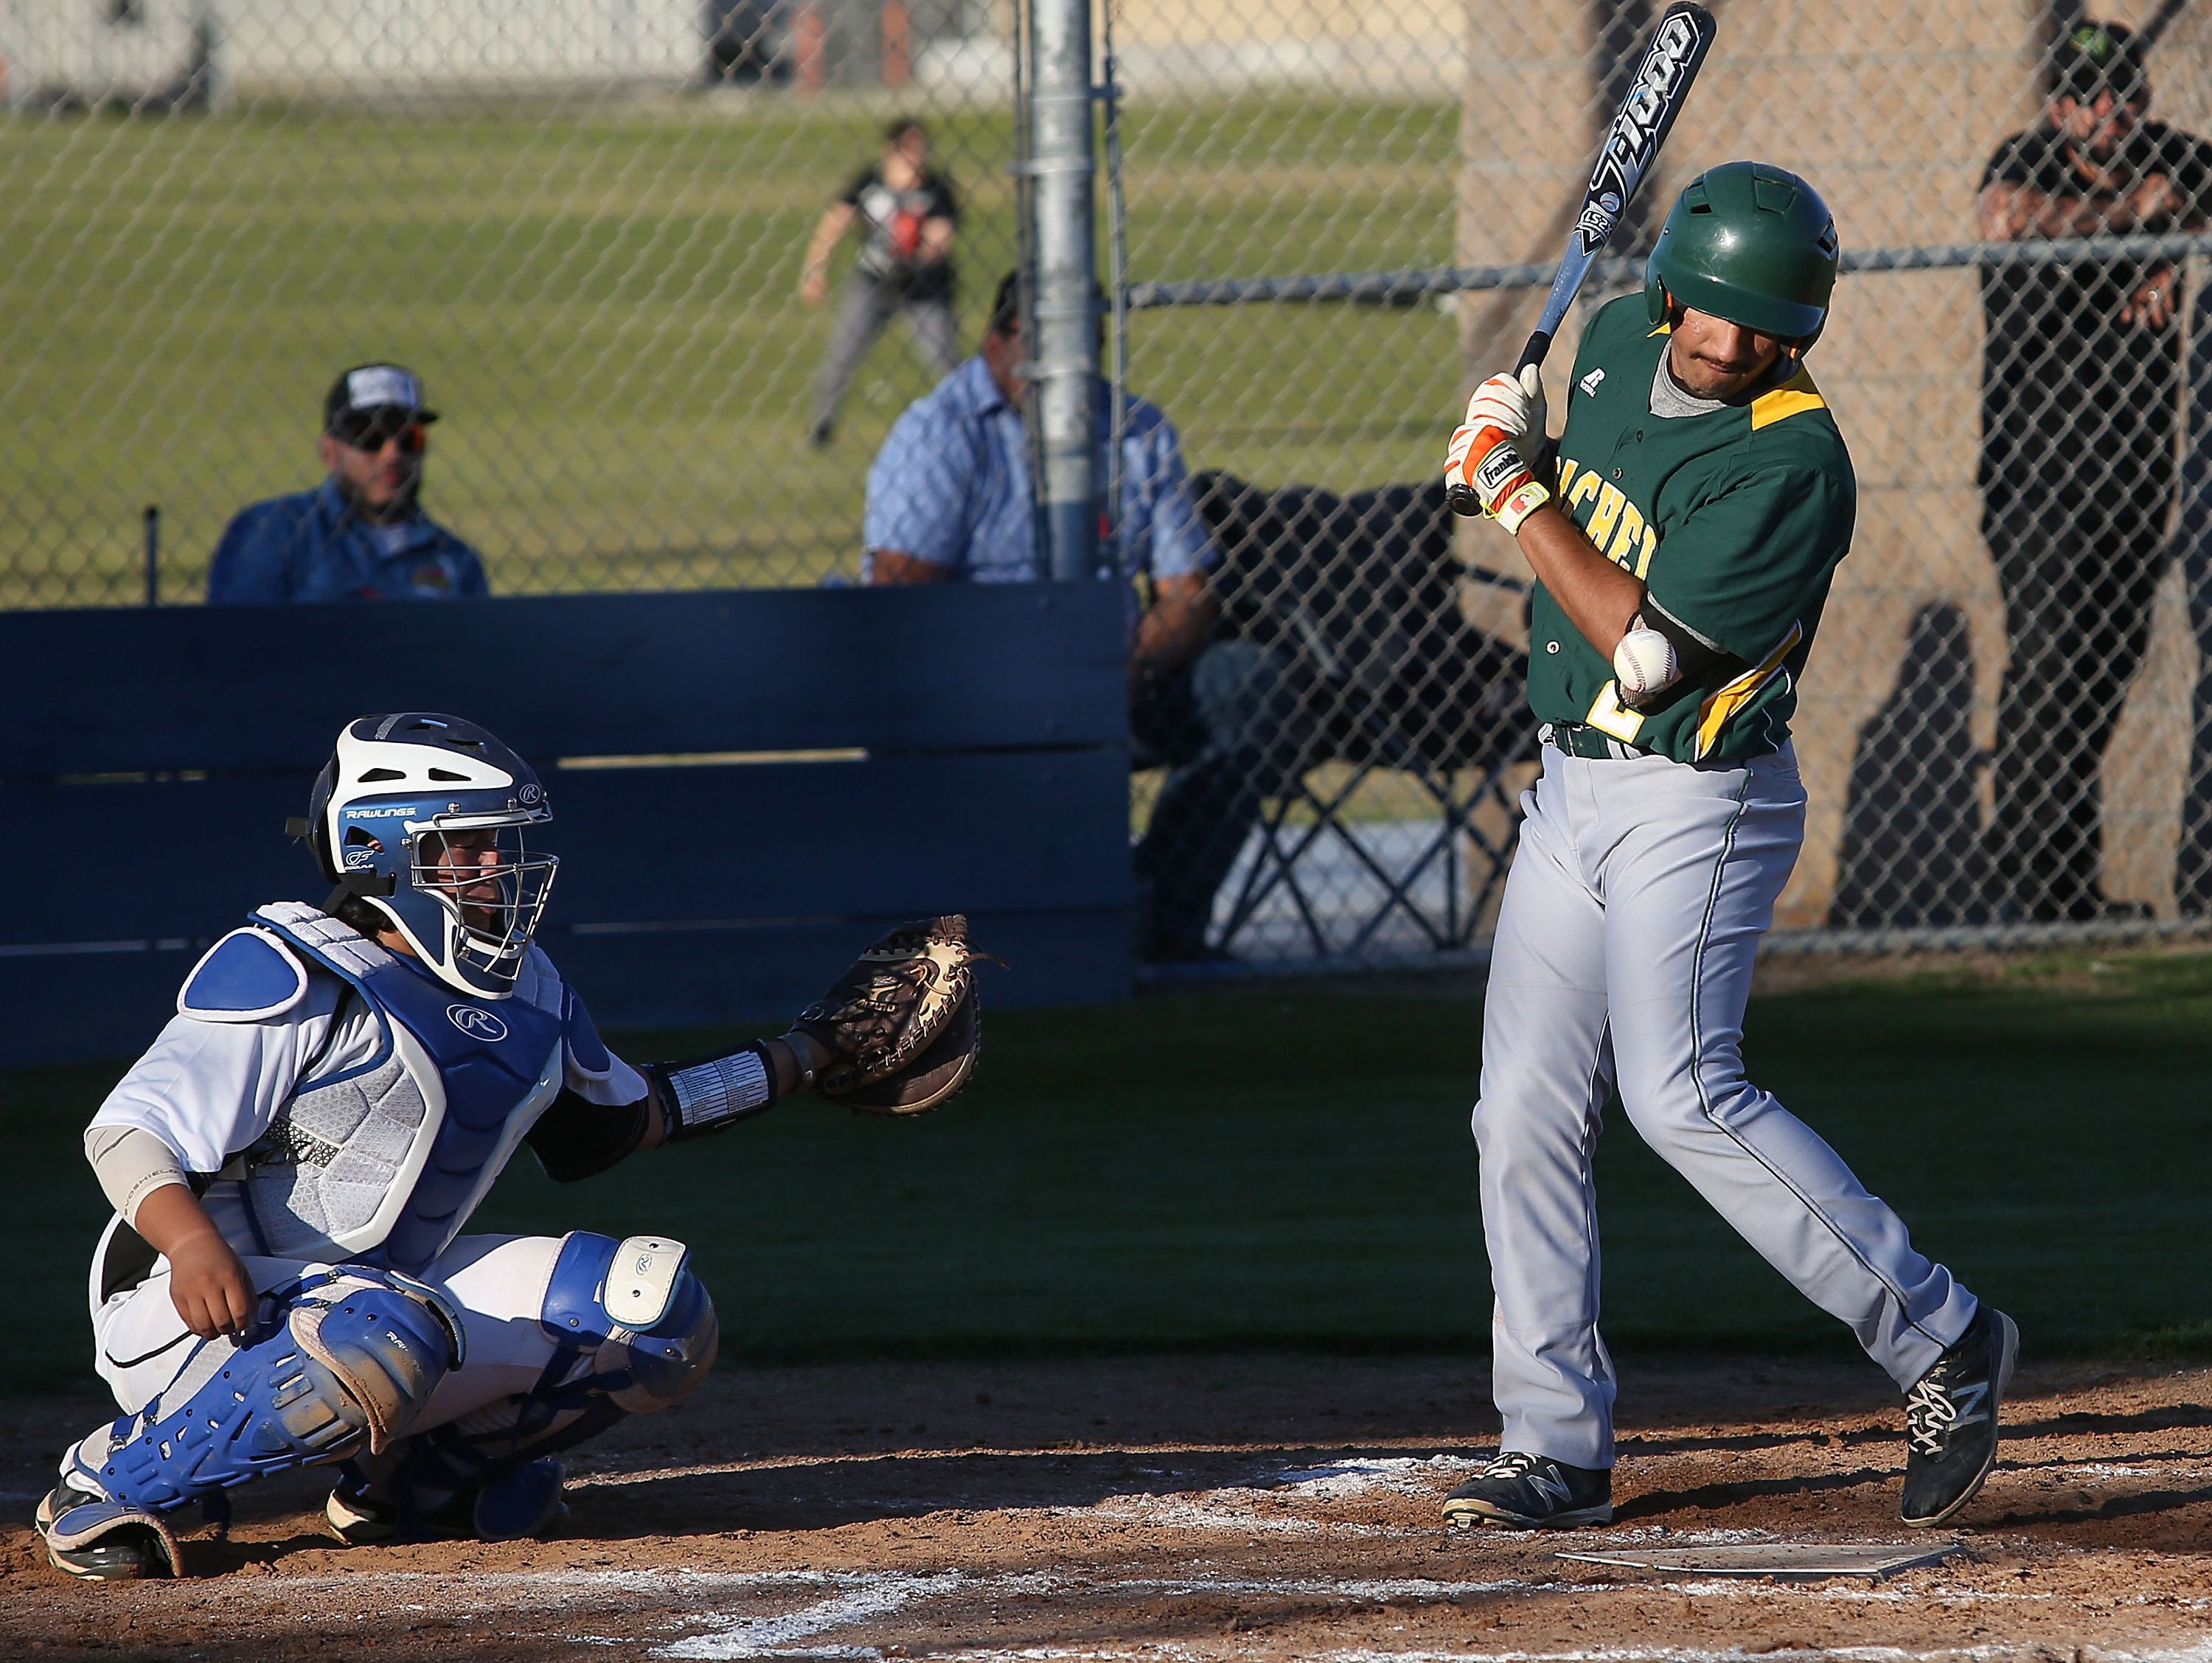 Julian Inzunza of Coachella is hit by a pitch during their game against Cathedral City, March 1, 2017.